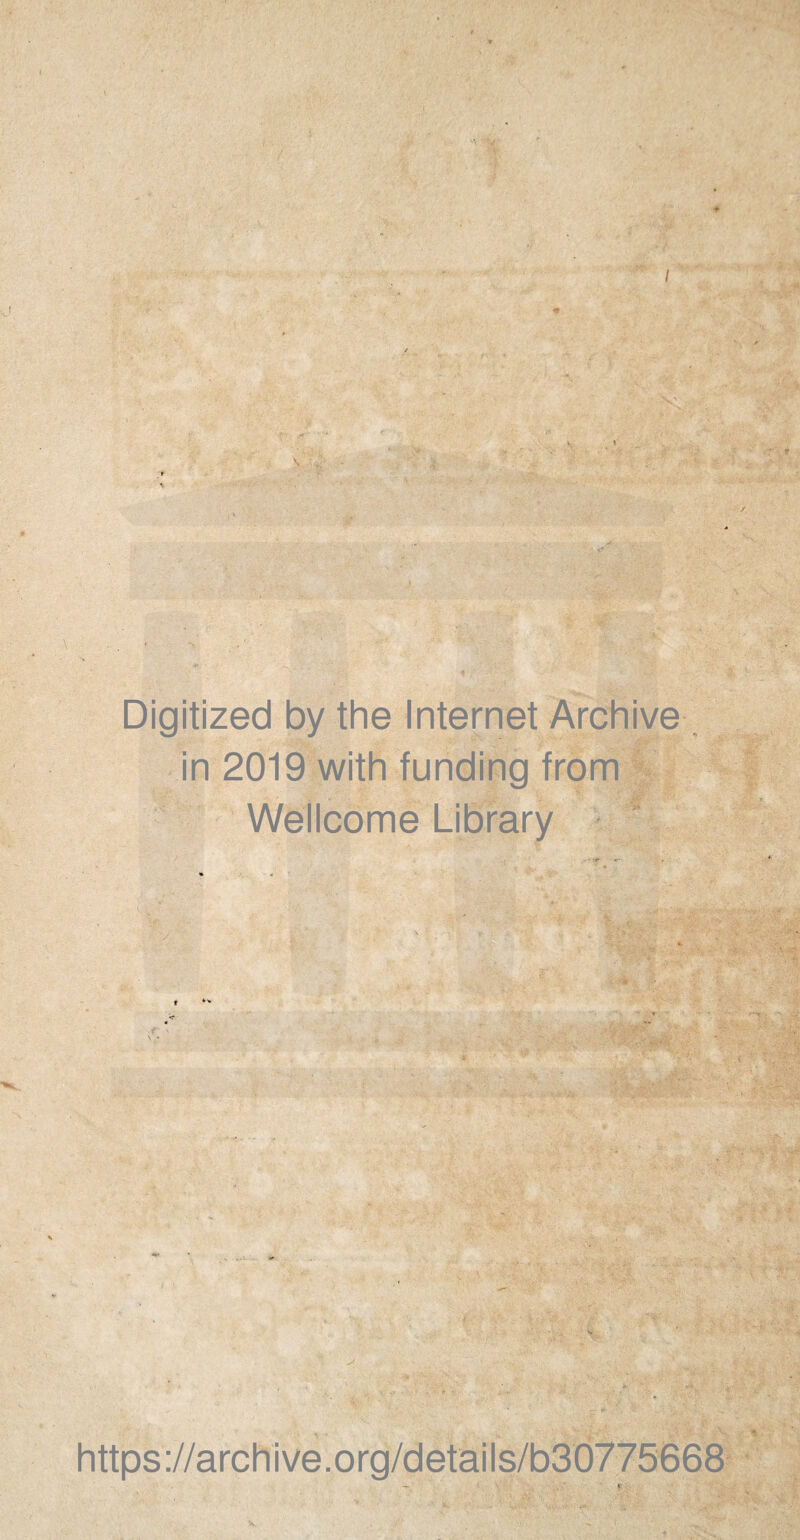 / Digitized by the Internet Archive in 2019 with funding from Wellcome Library https://archive.org/details/b30775668